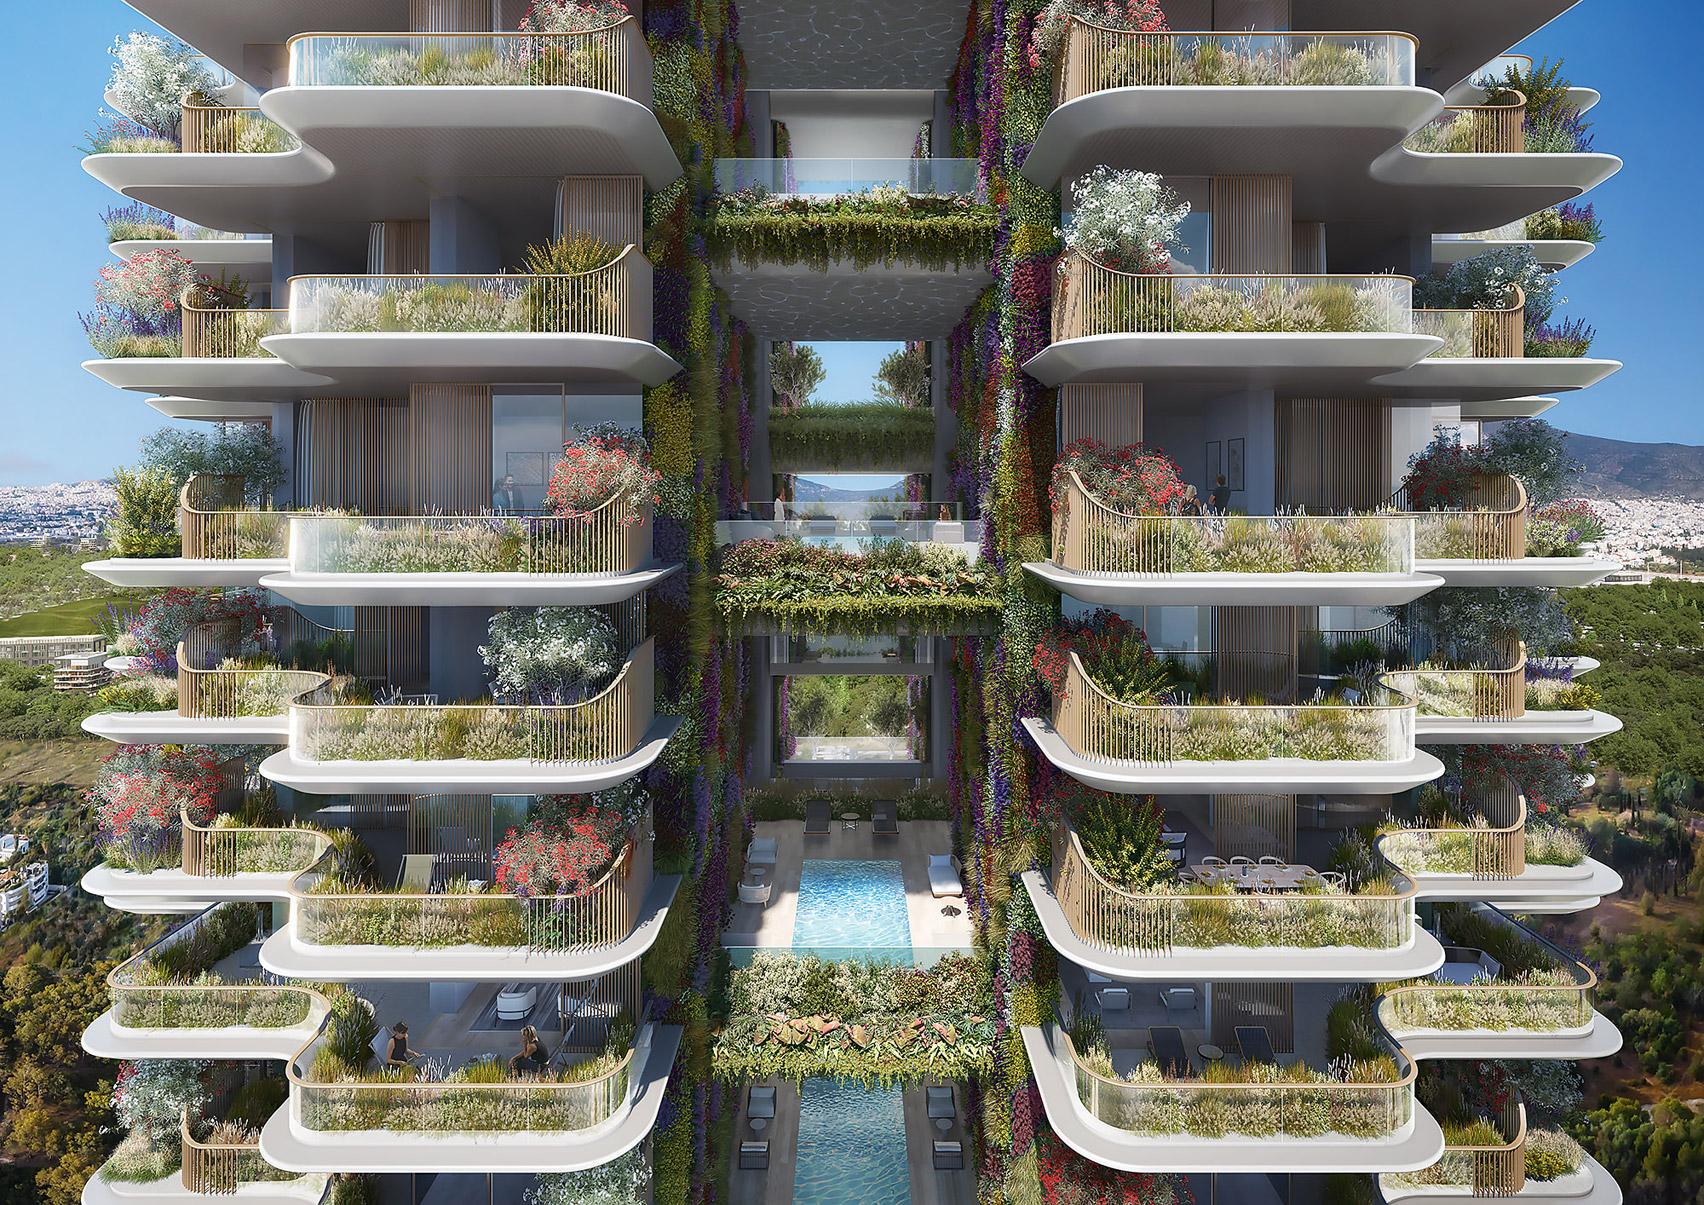 A visual of plant-lined balconies